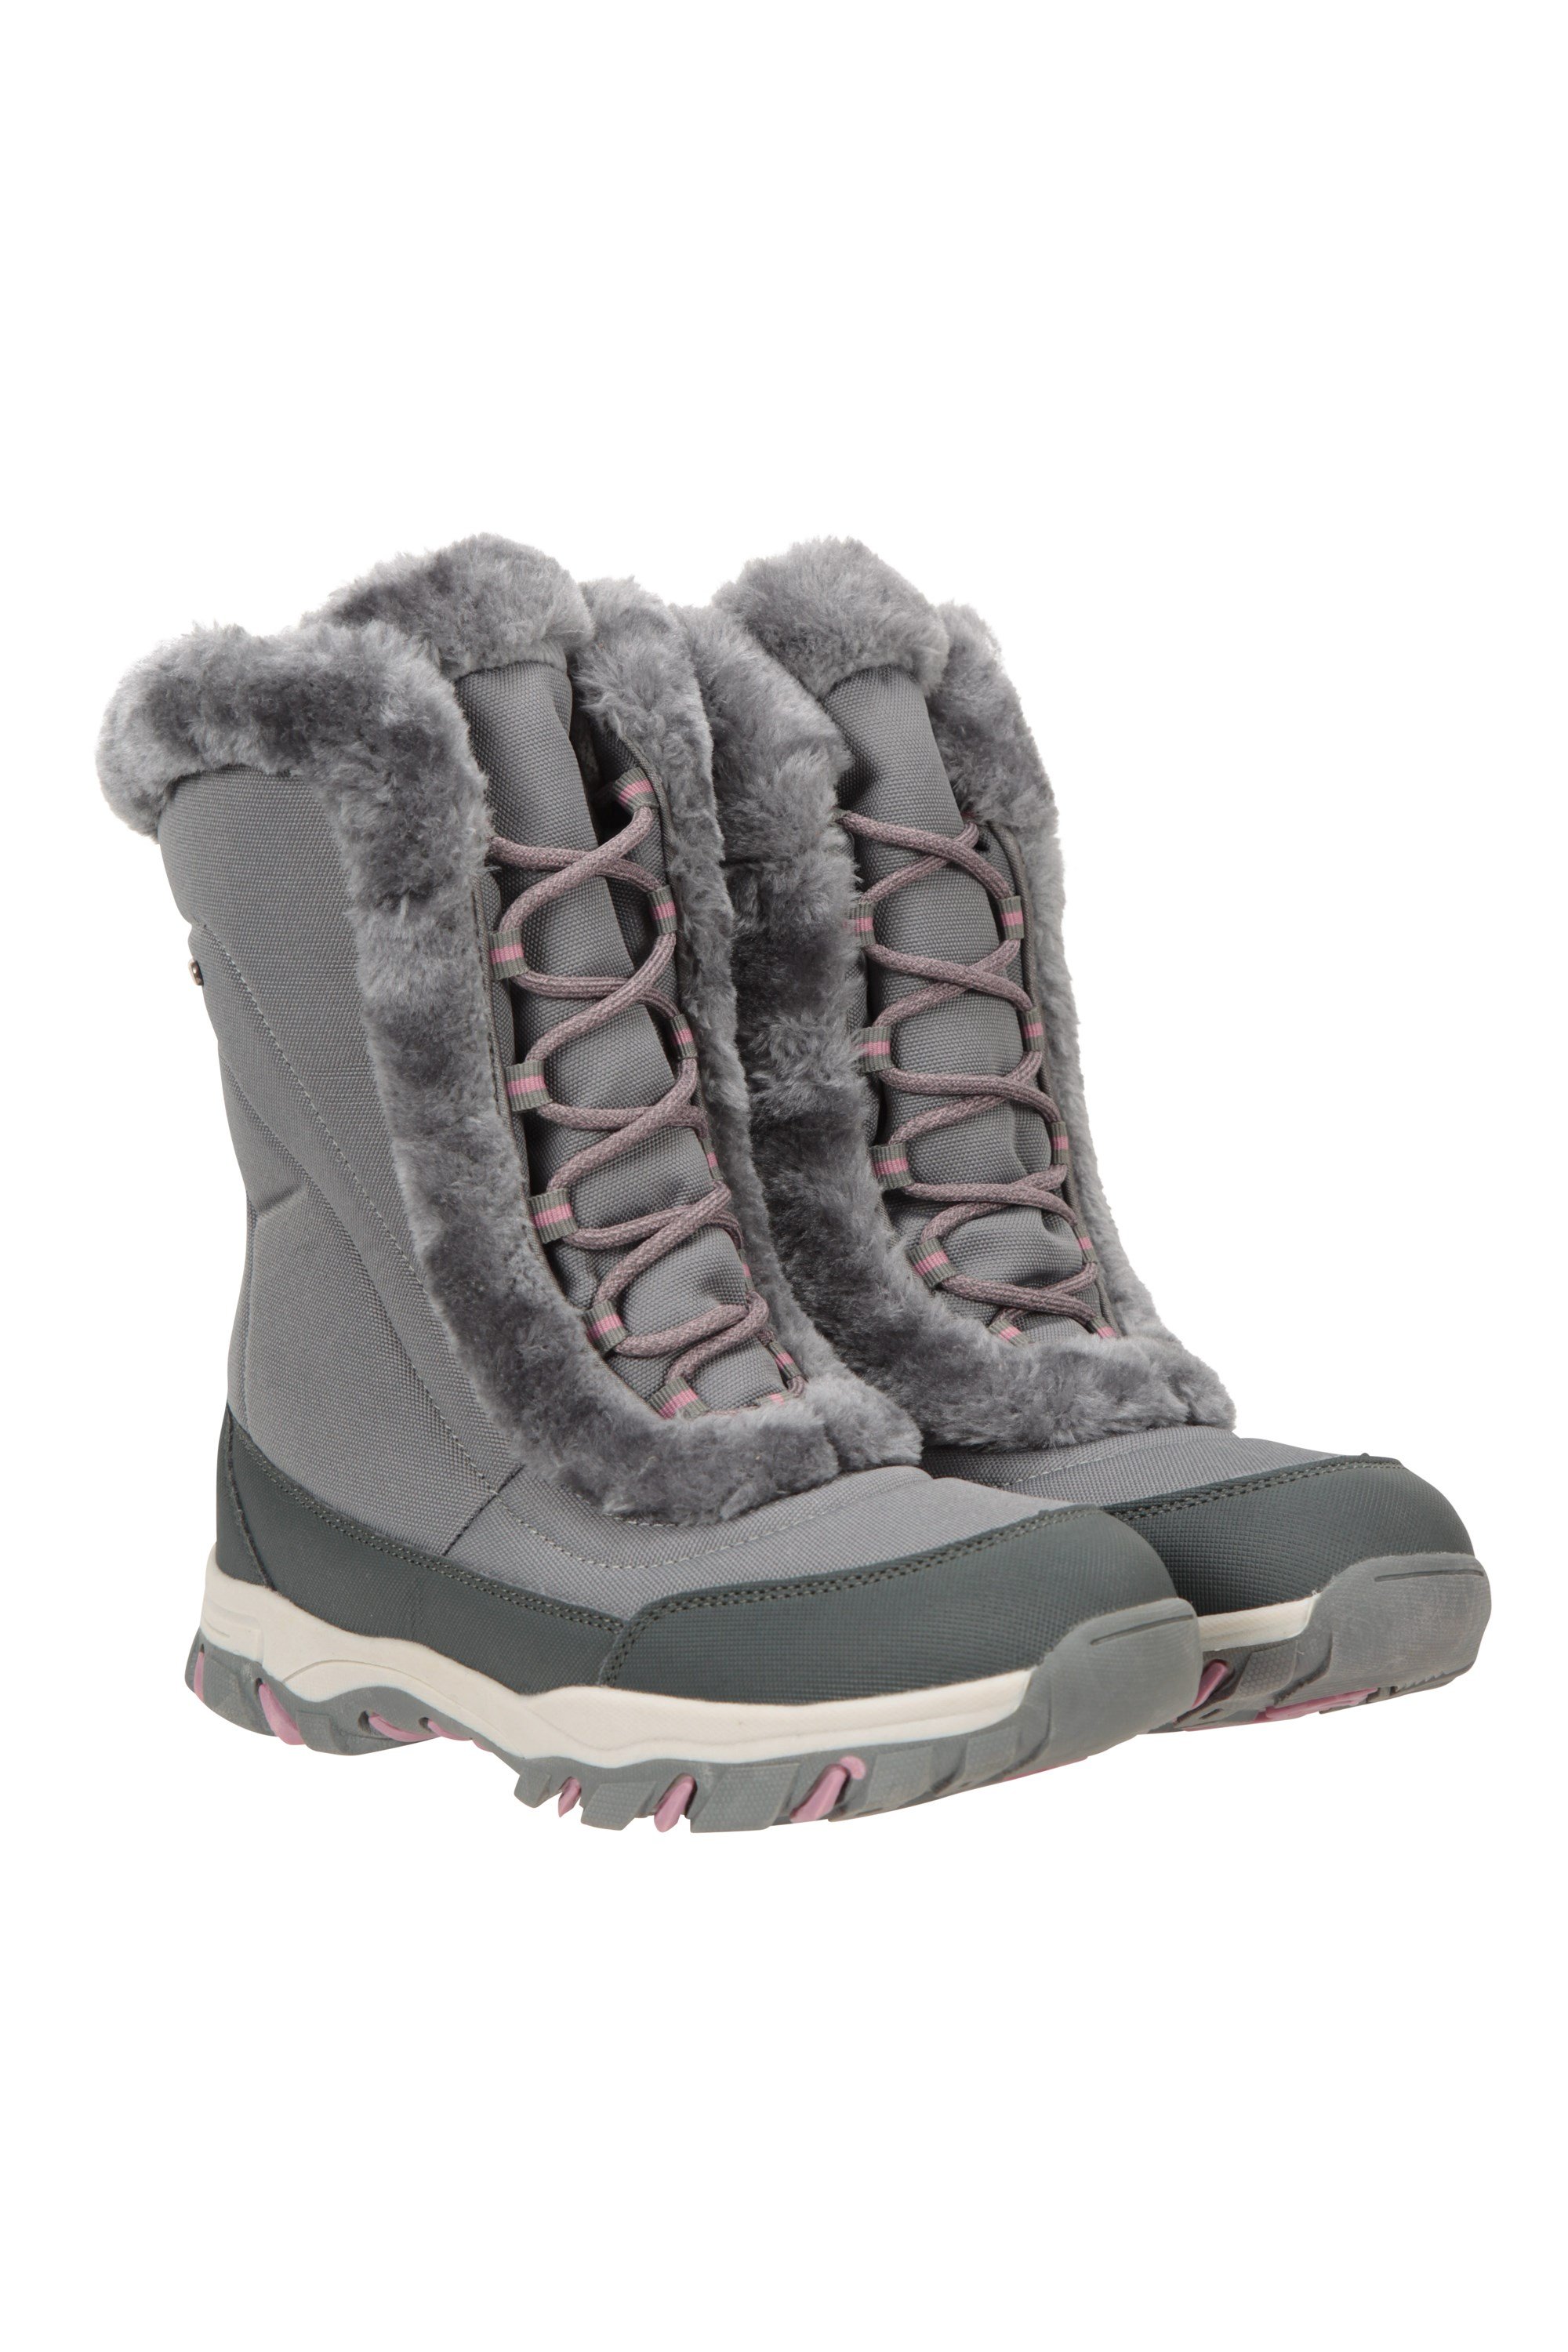 023147 OHIO WOMENS THERMAL FLEECE LINED SNOW BOOT